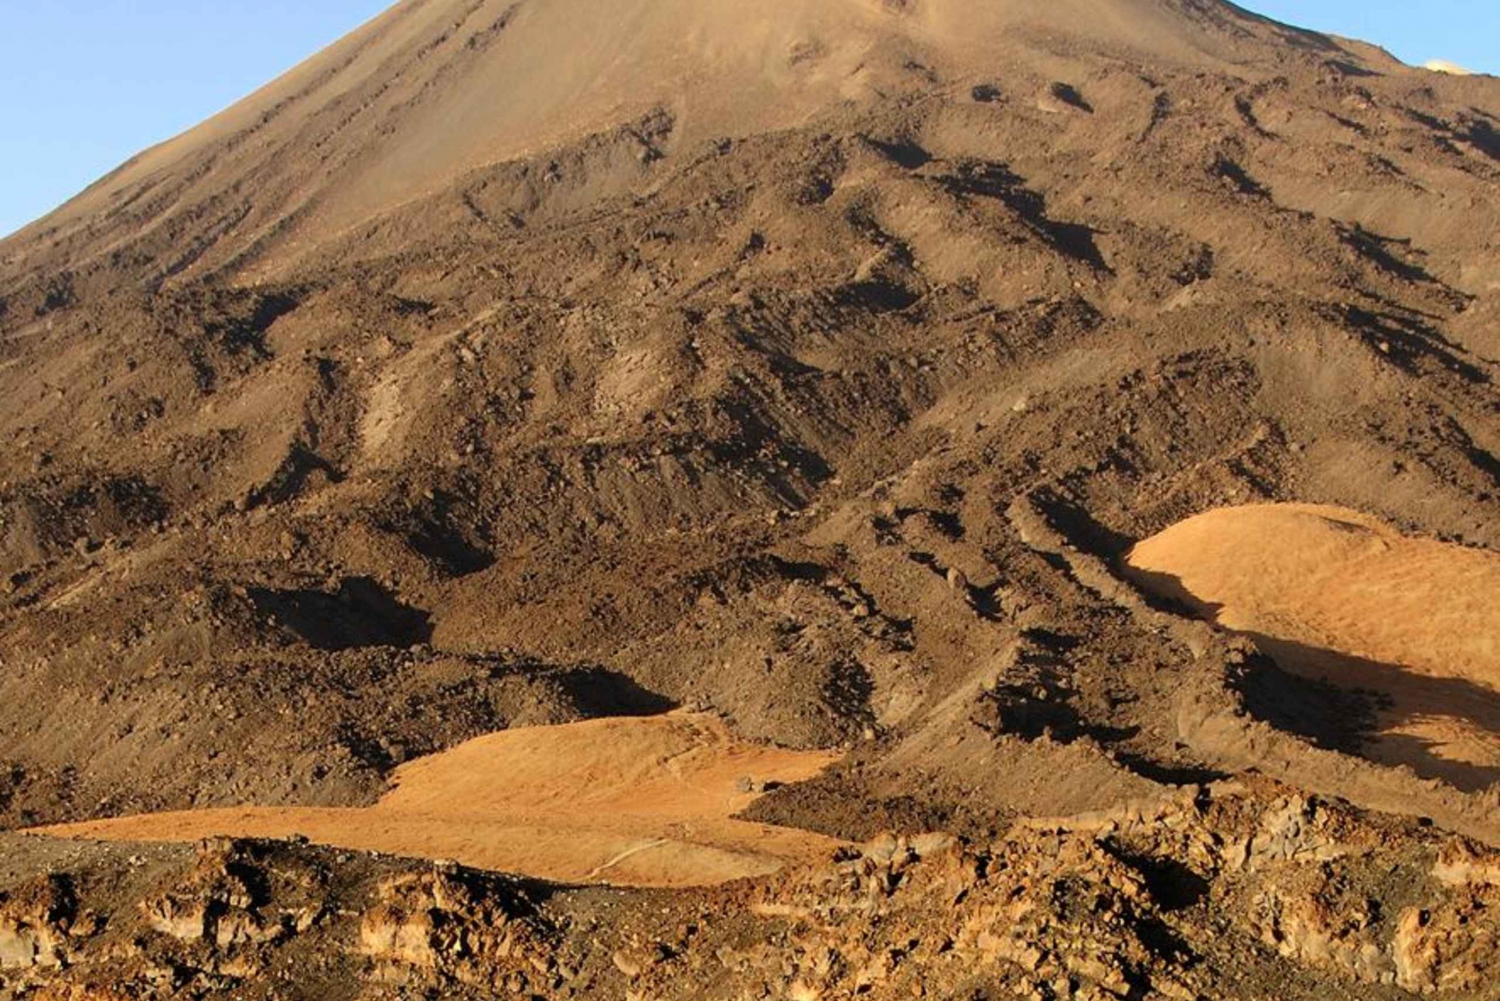  Teide and Teno National Park Full-Day Tour